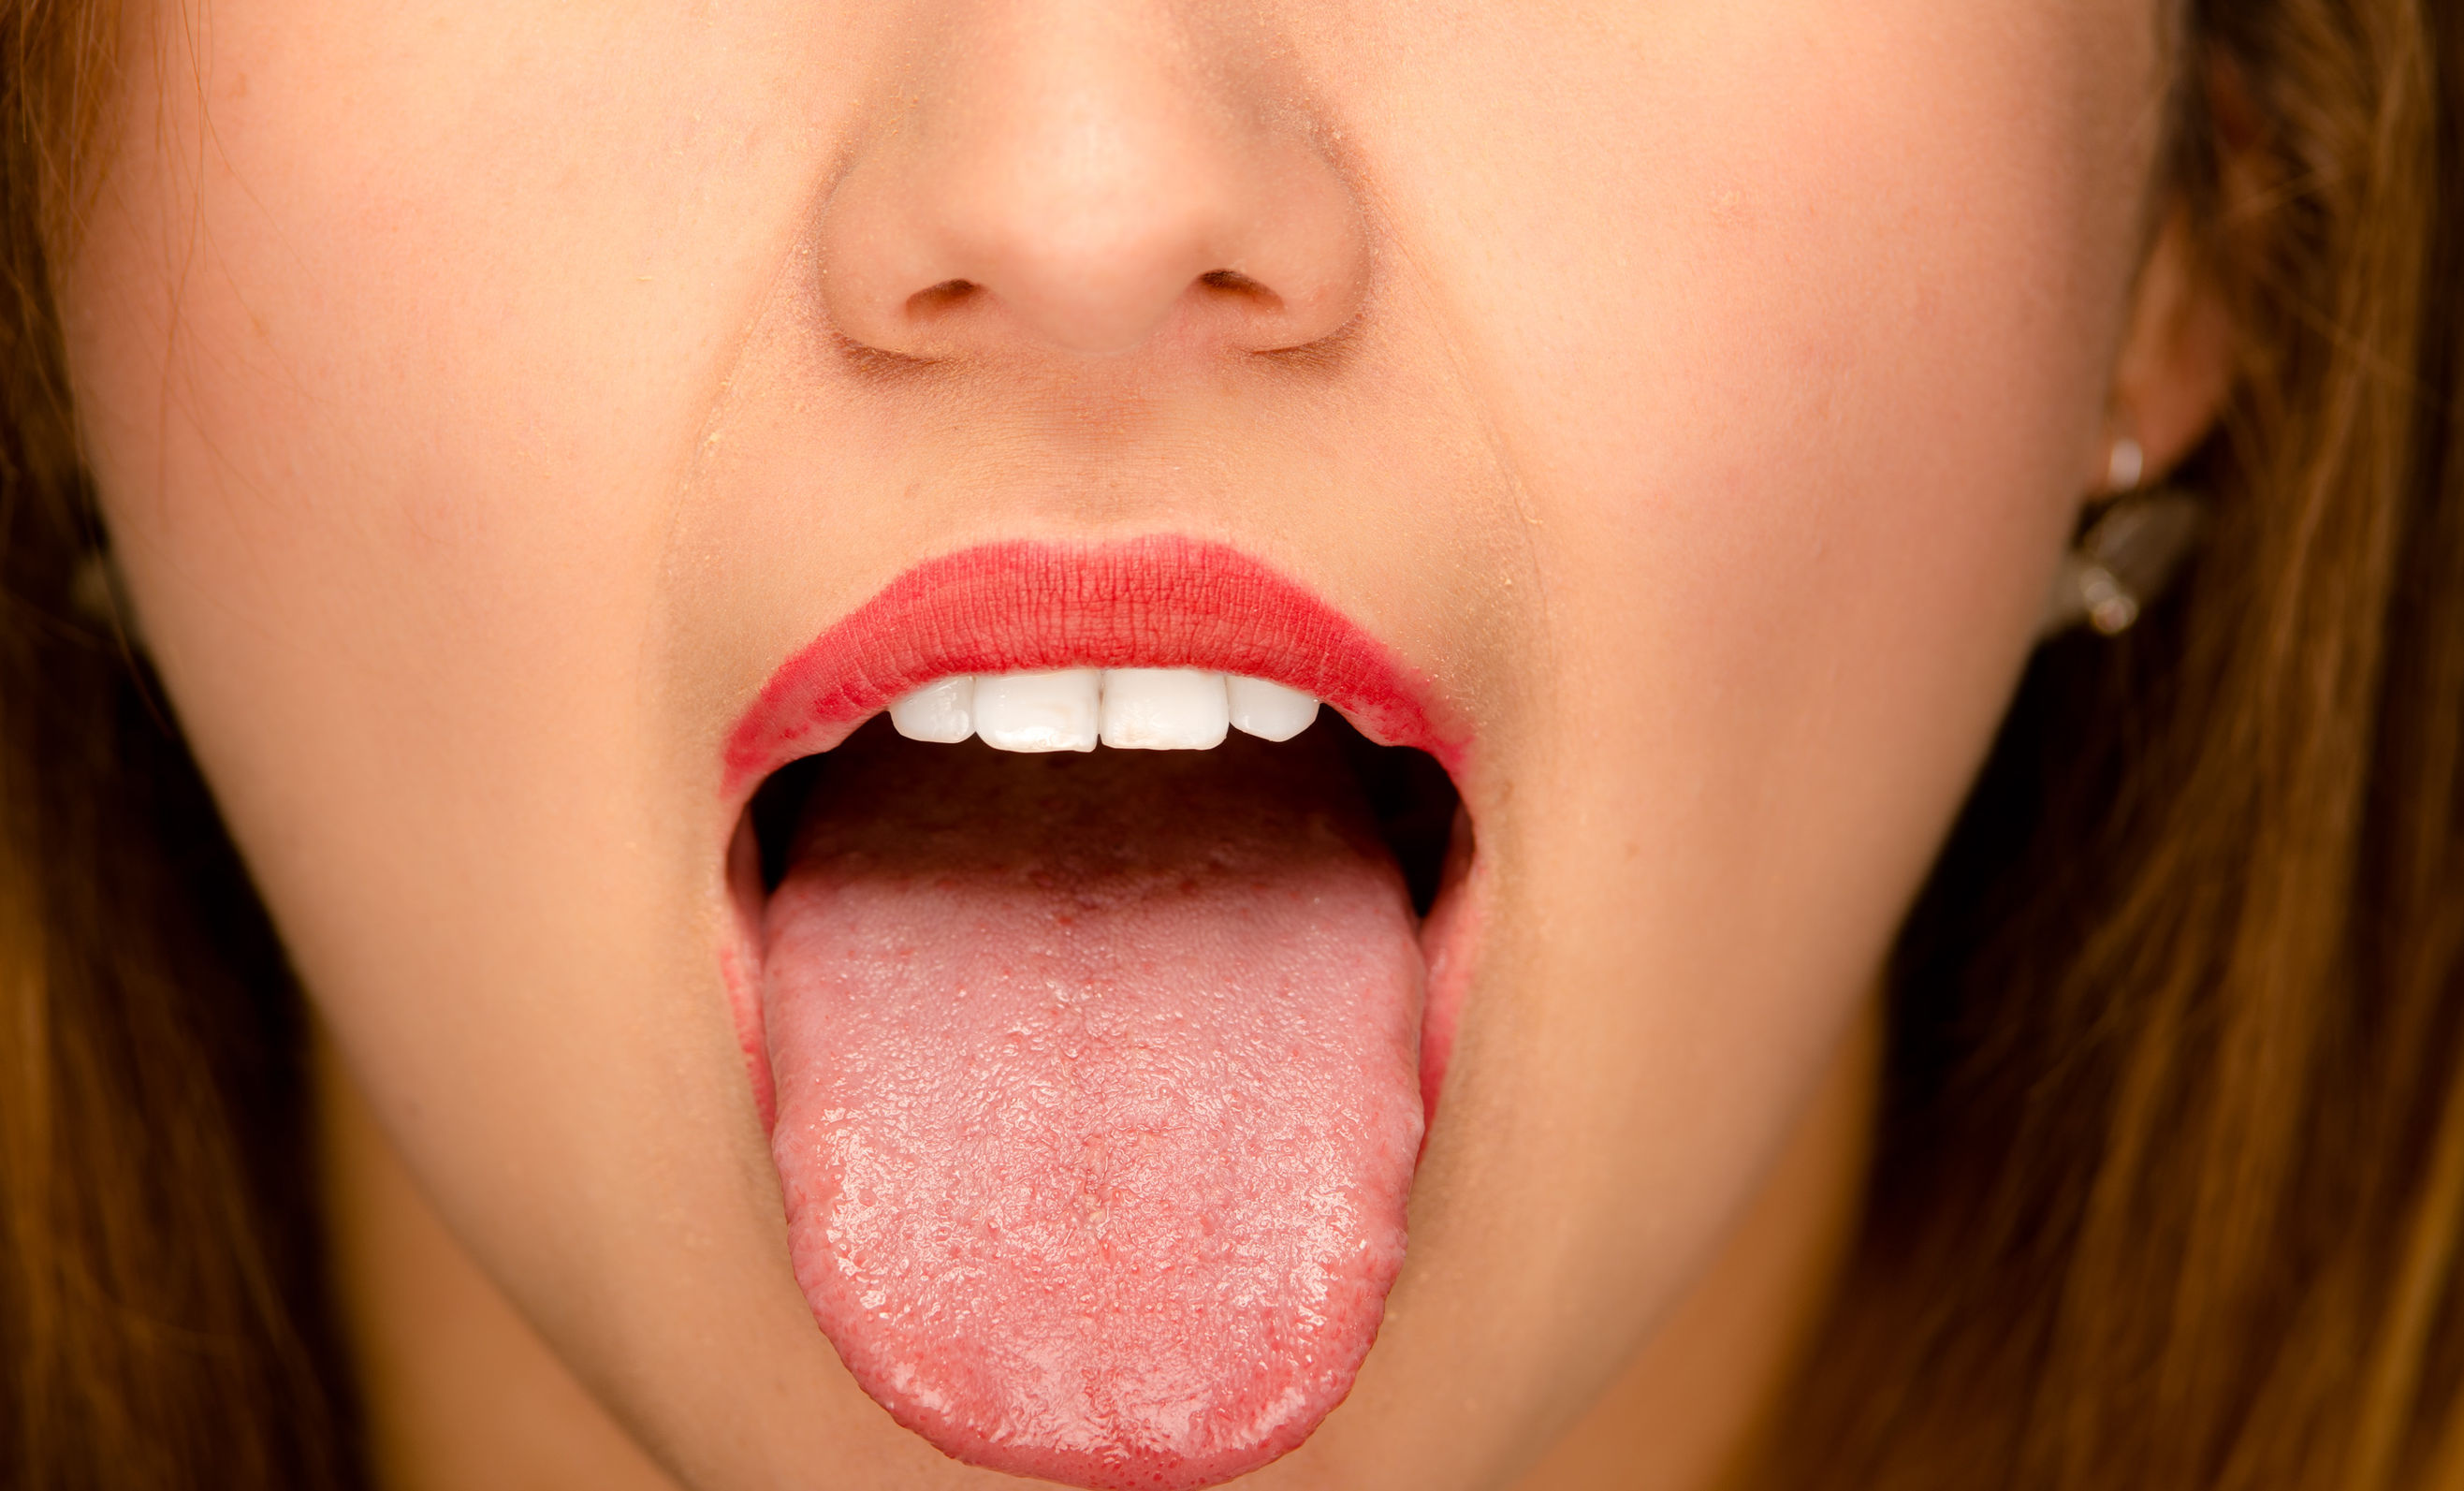 55226600 Closeup Young Womans Open Mouth With Tongue Sticking Out 